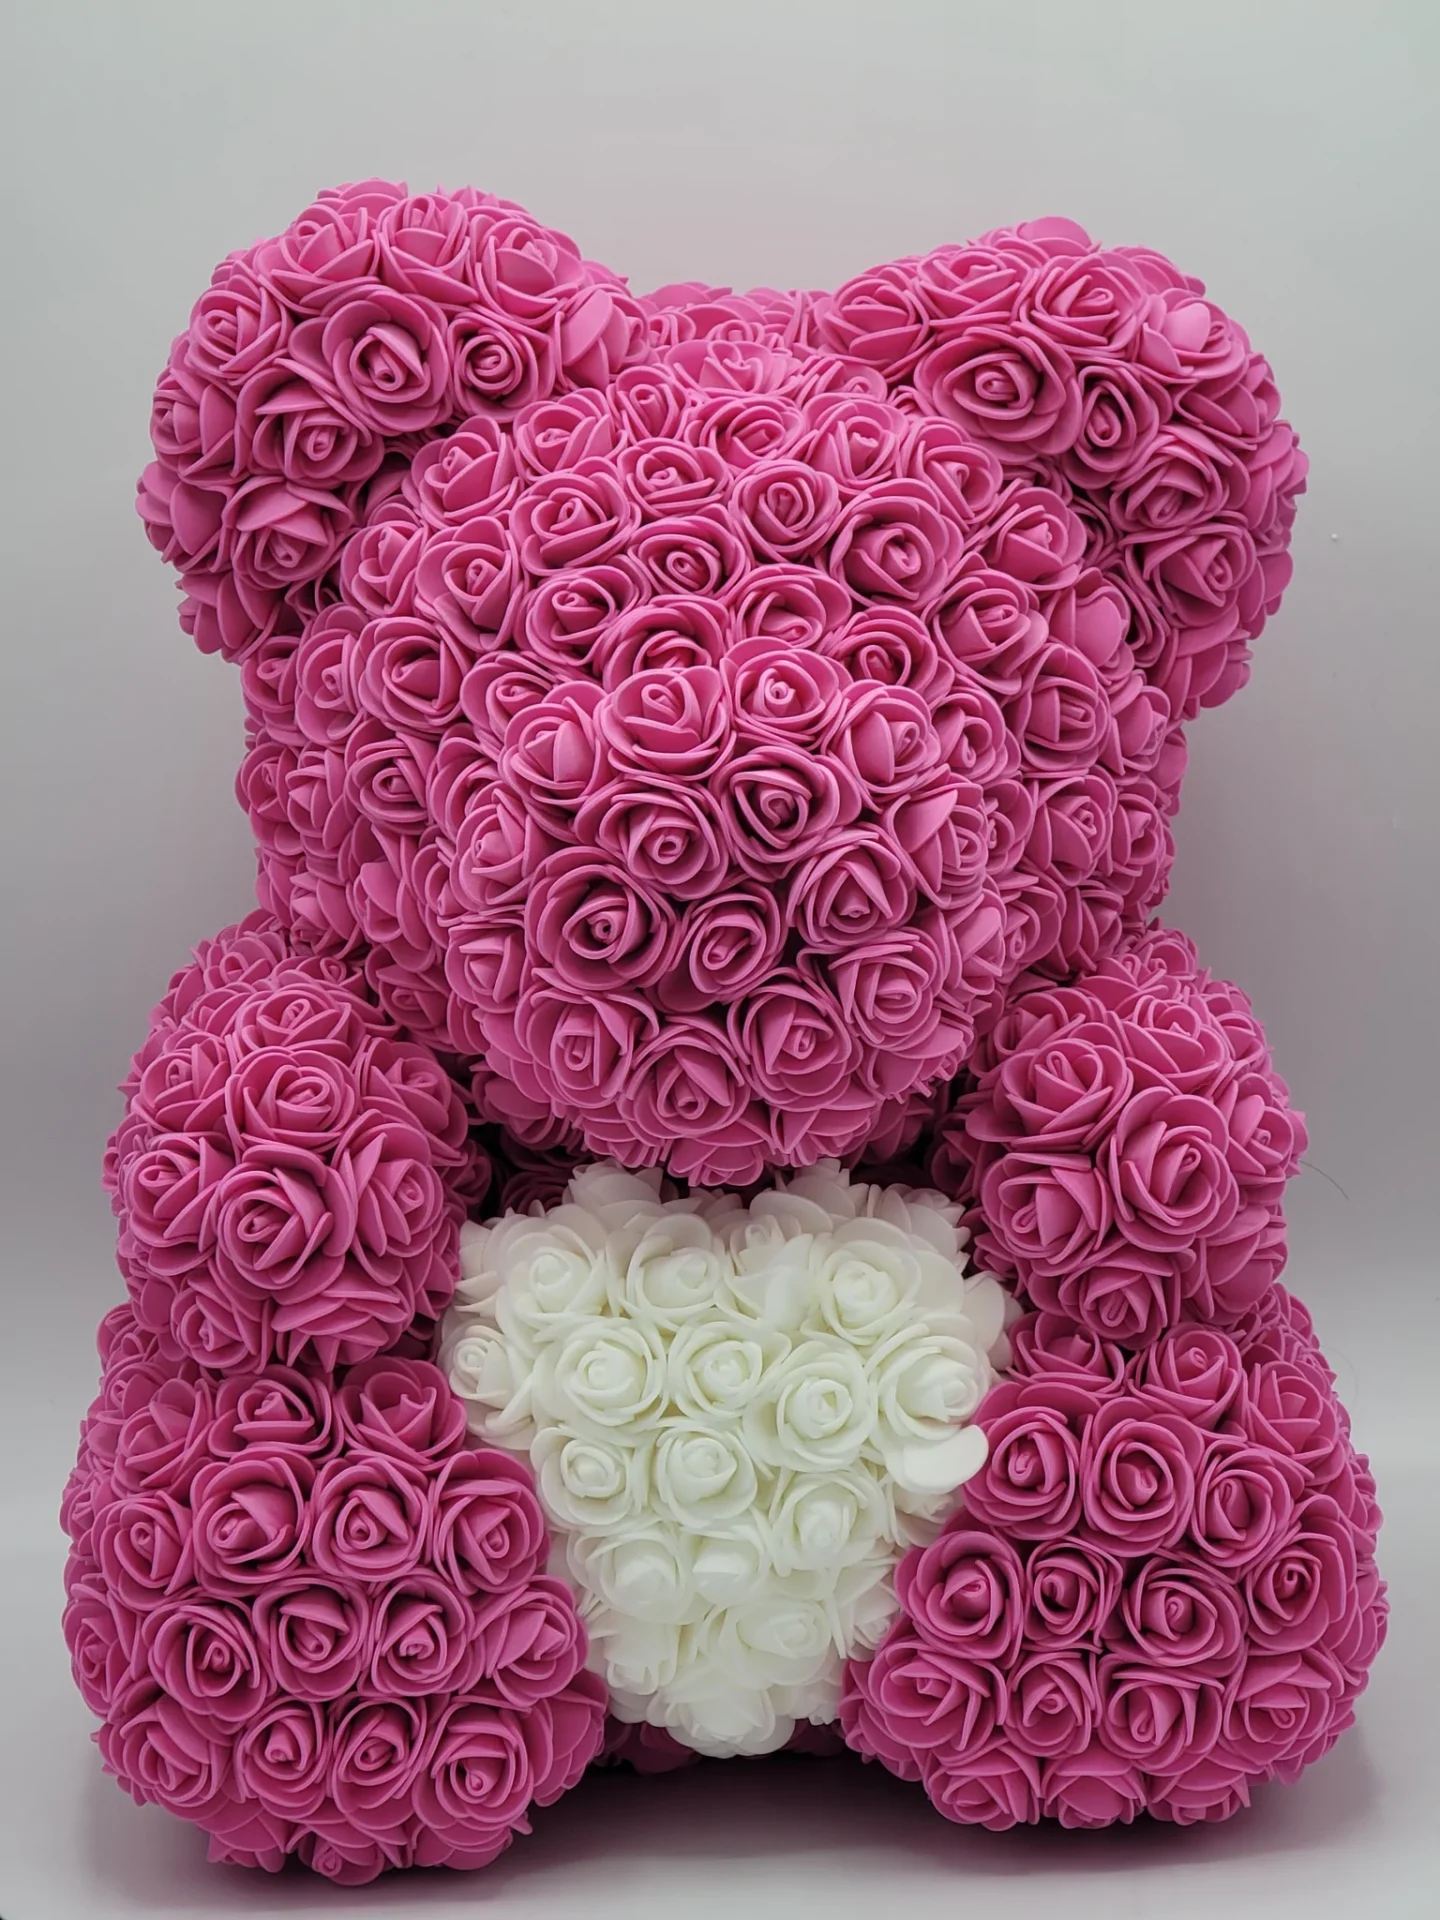 A sitting bear made of pink and white roses